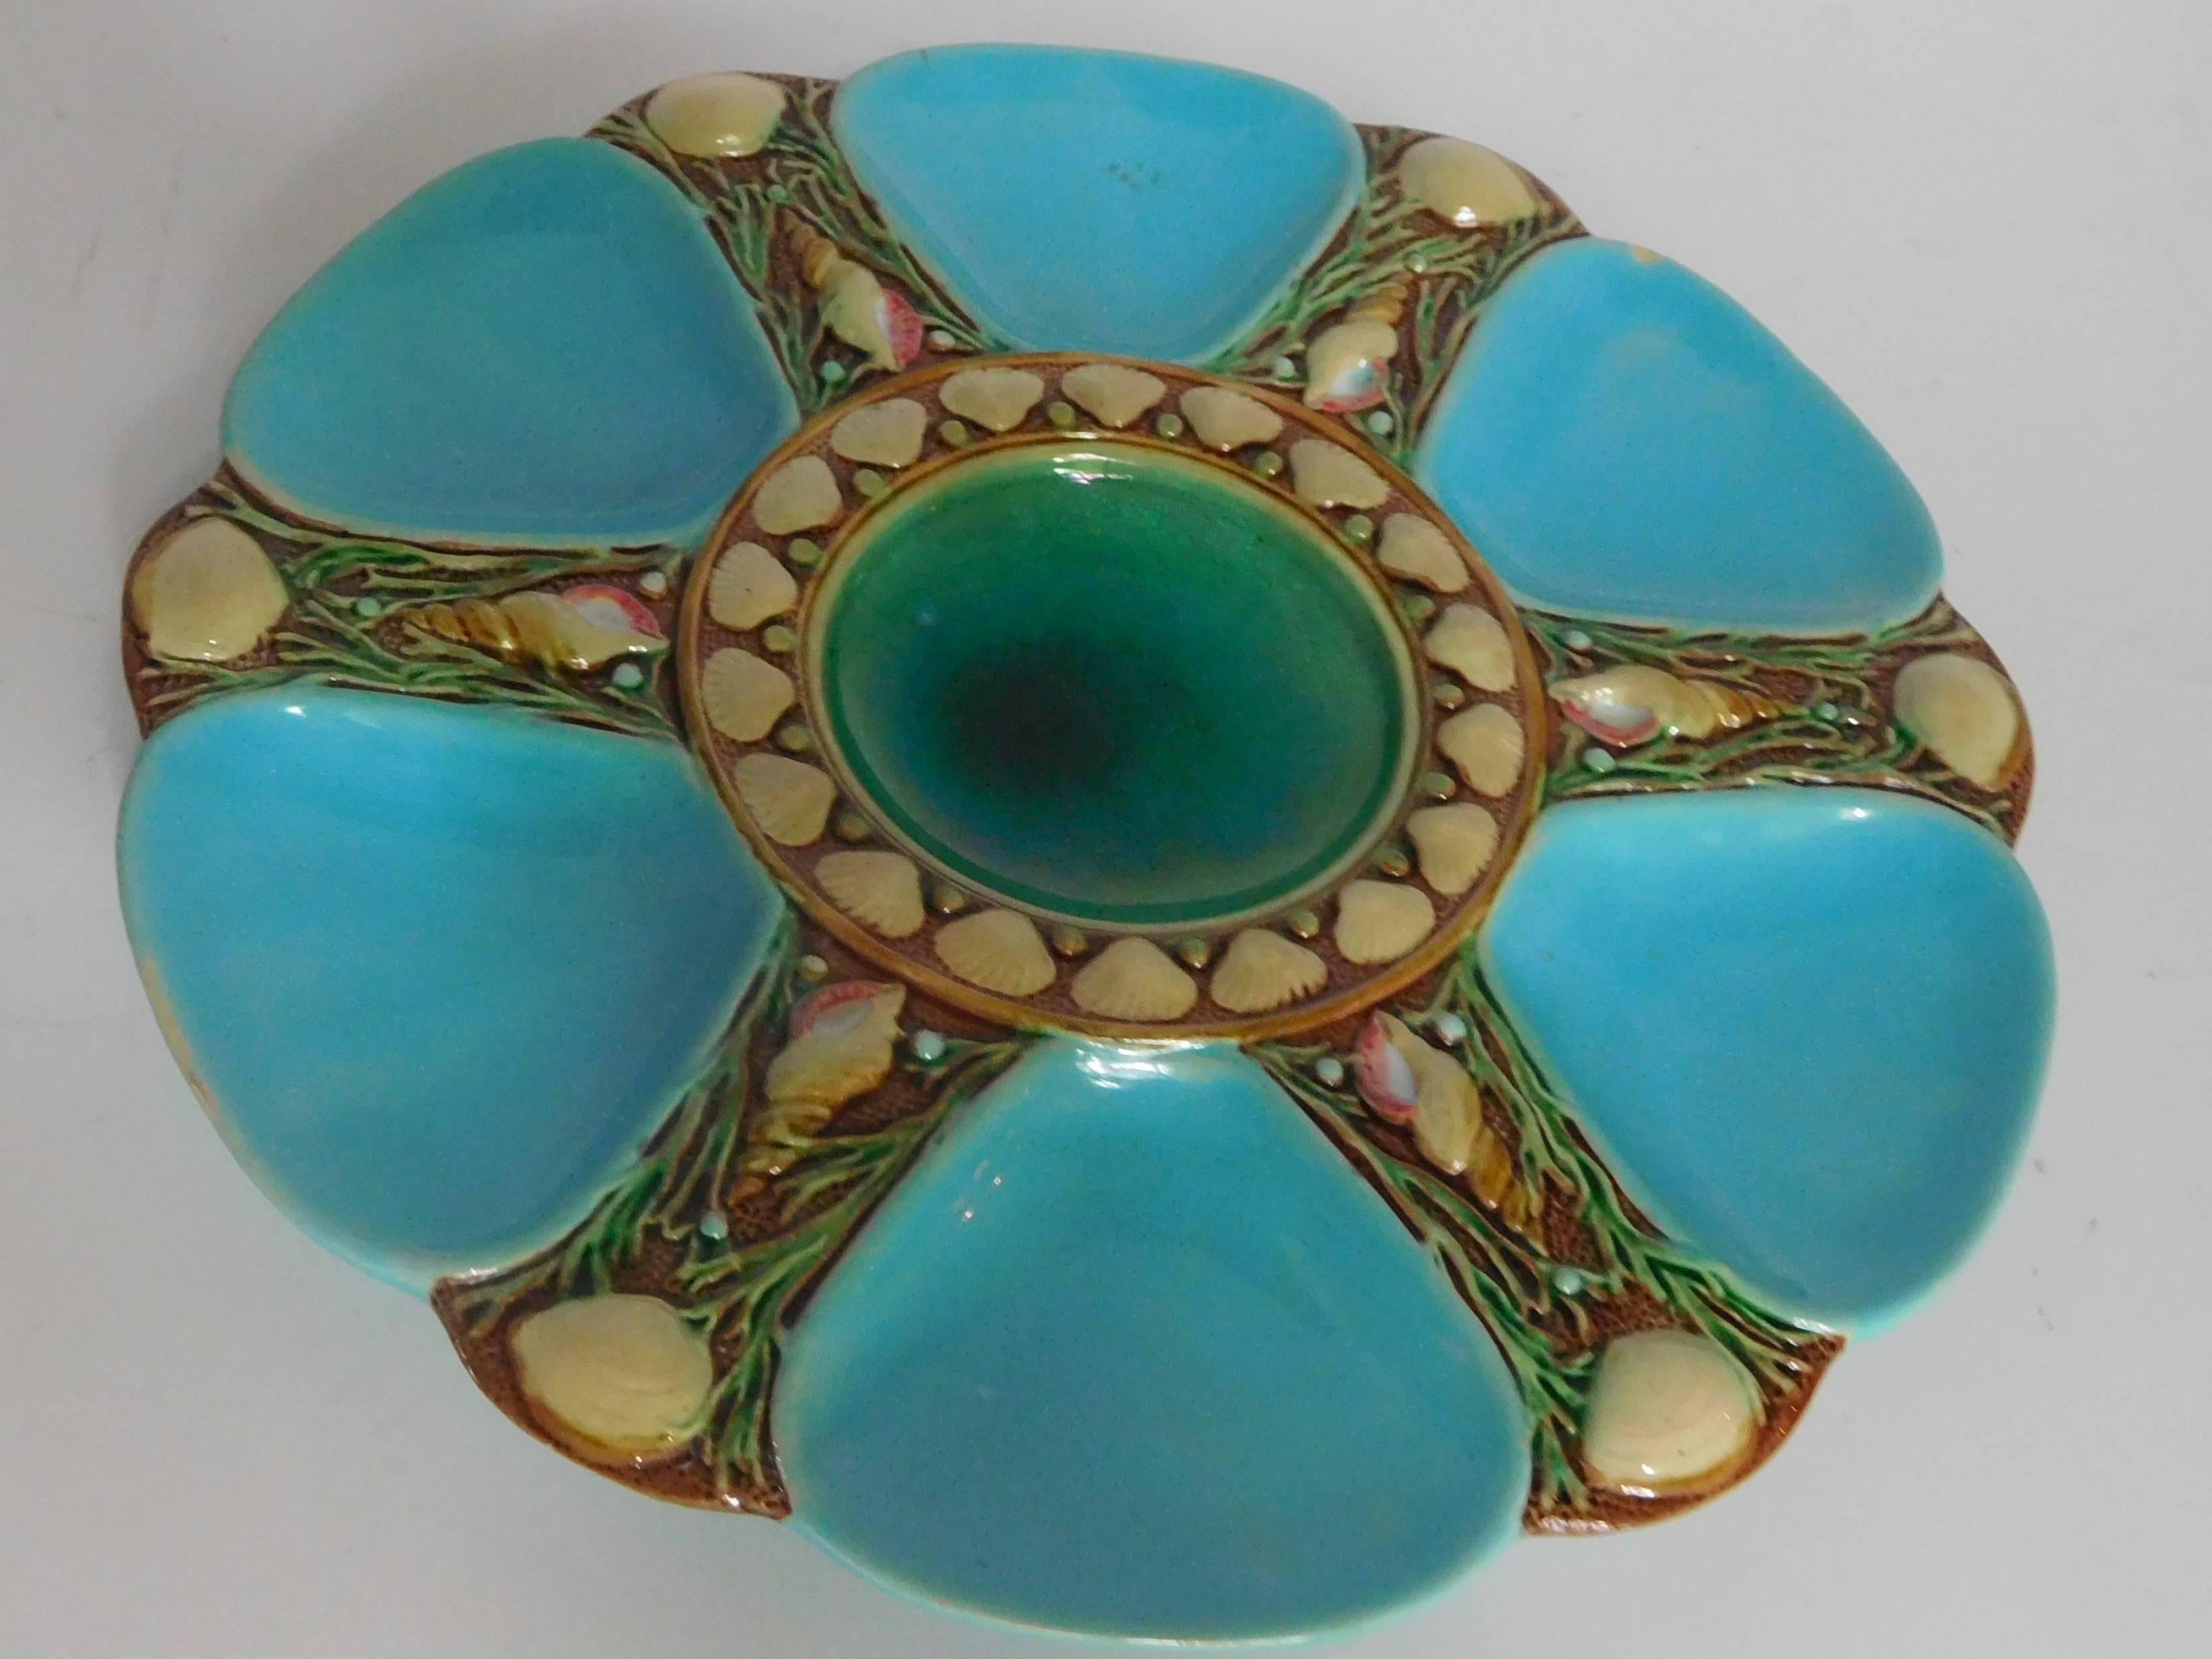 This colorful oyster plate has six turquoise-colored wells shaped like shells on a bed of little white shells and dark seaweeds. In the center is a sauce well in deep ocean green surrounded by a parade of pearls and shells. This pattern, sold in